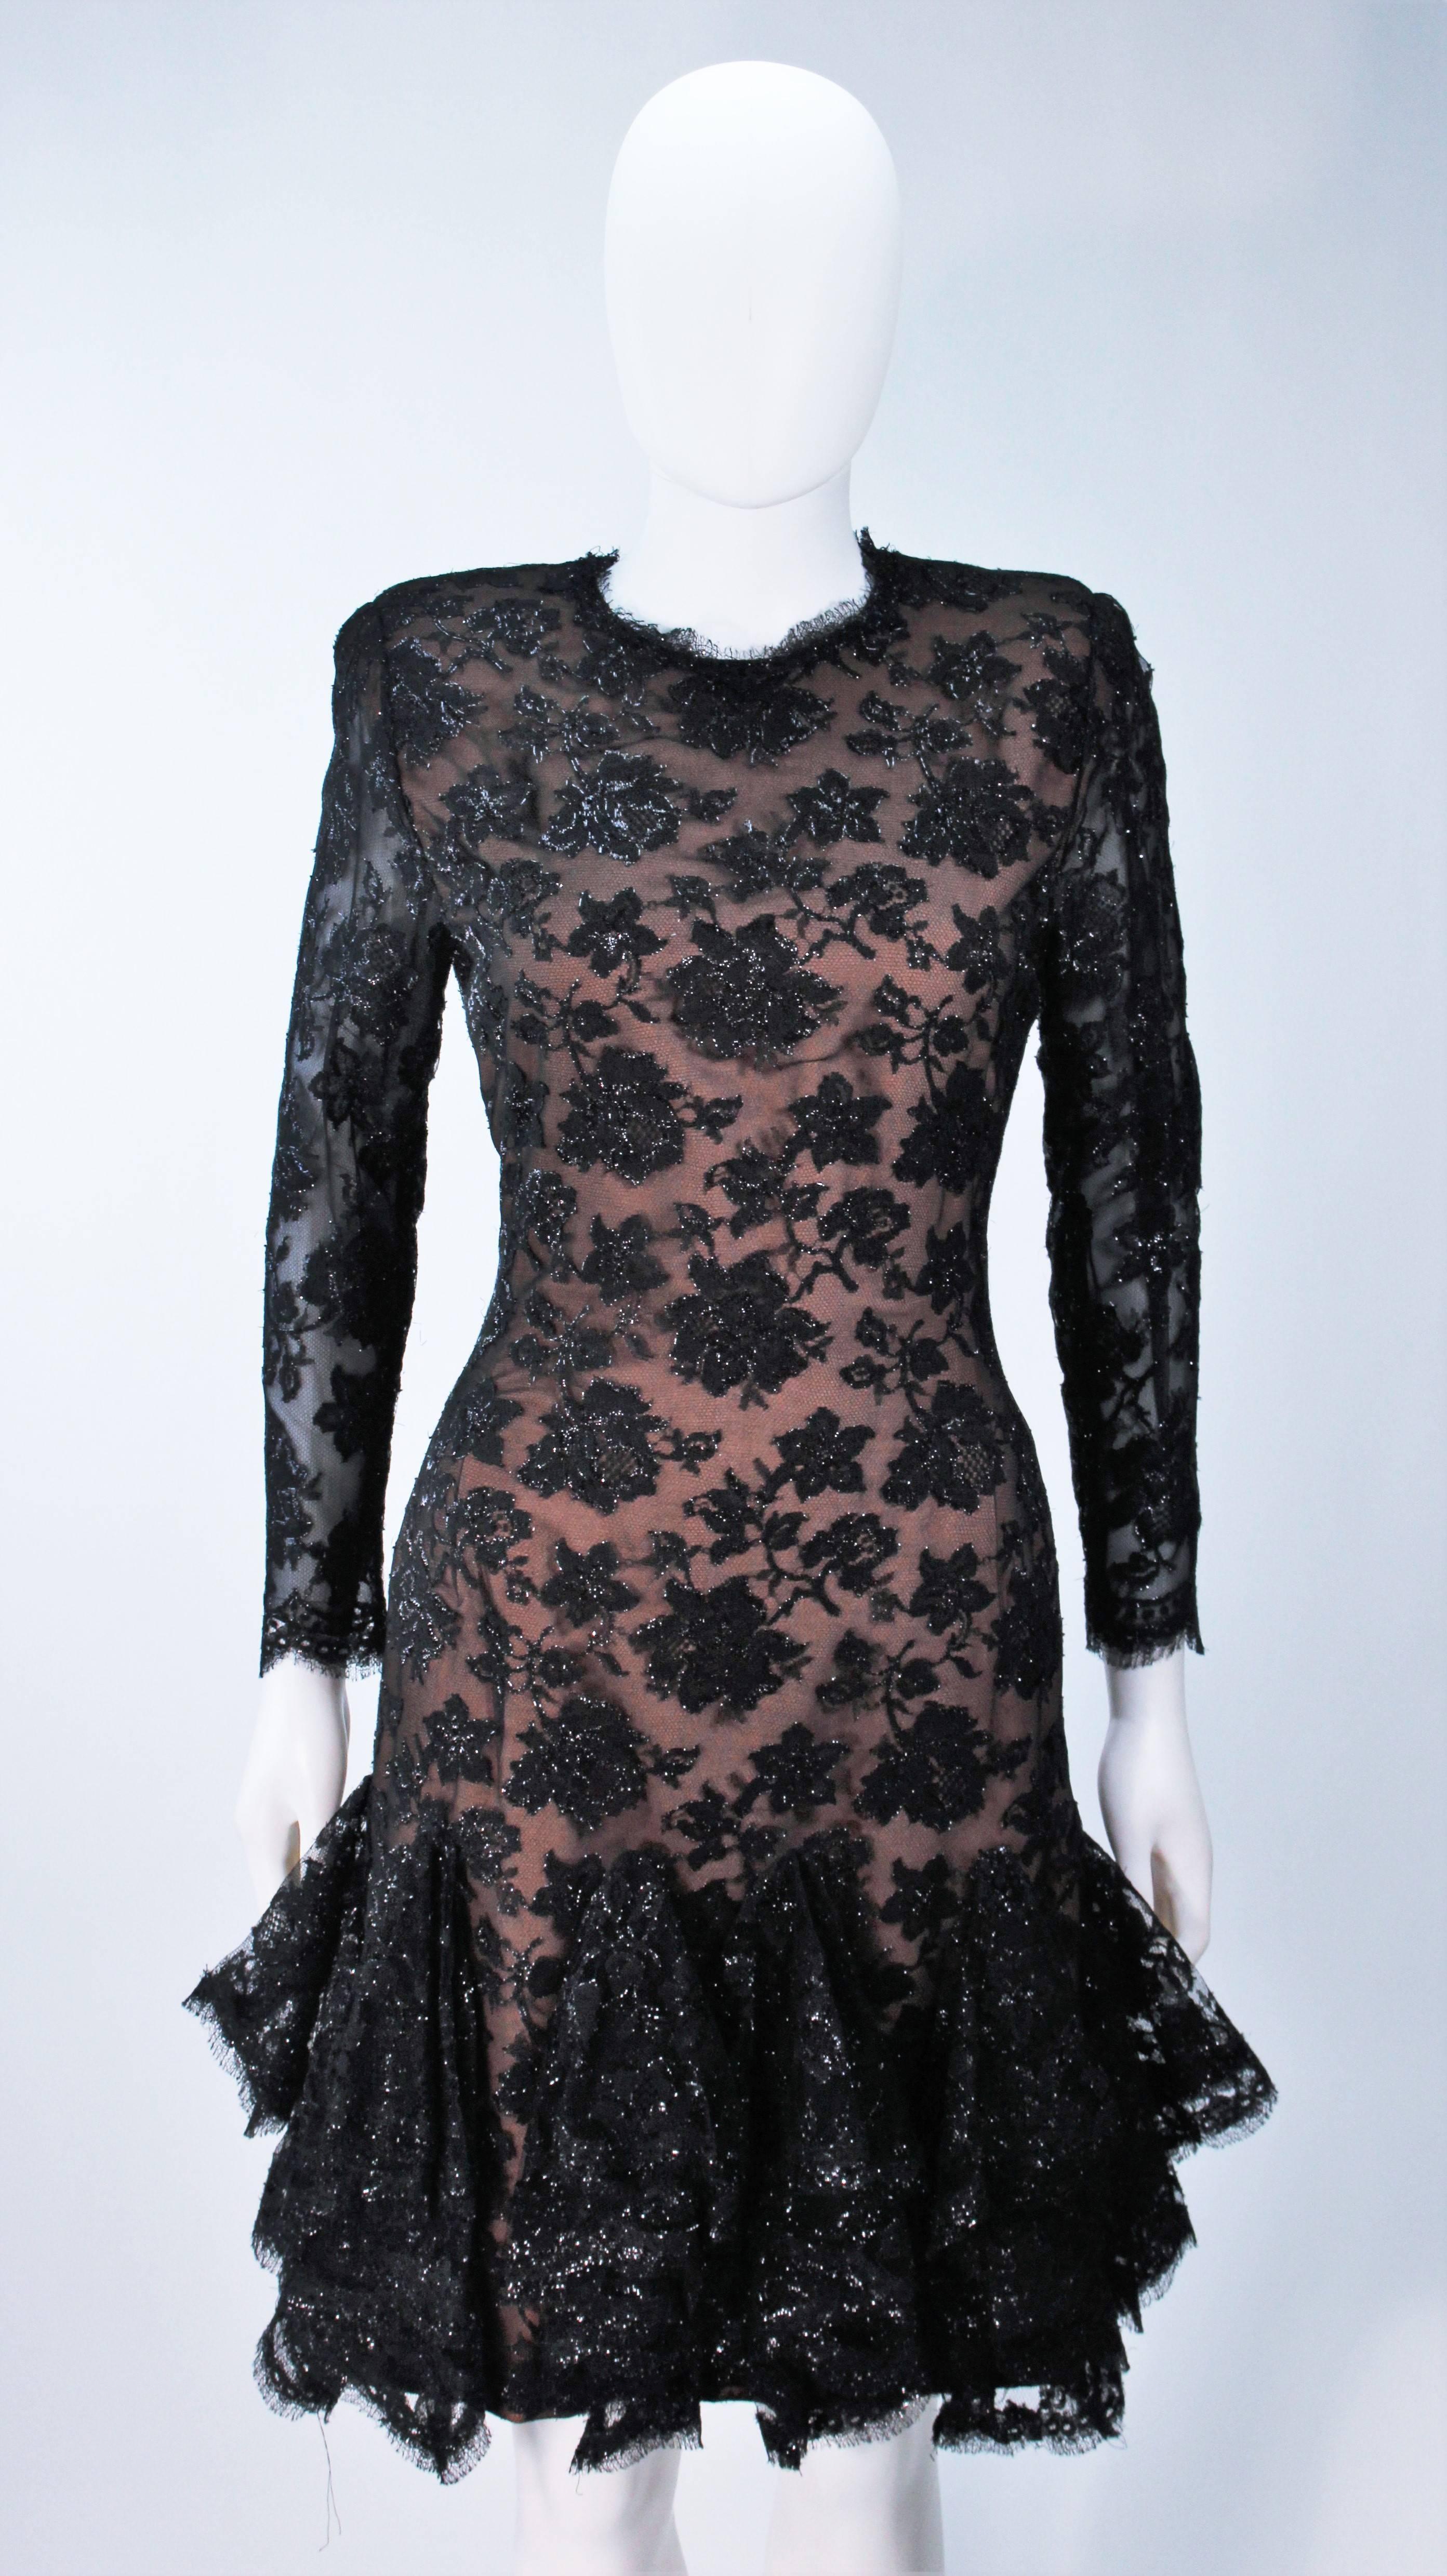 TRAVILLA Black on Black Lace Lame Cocktail Dress with Ruffle Hem Size 8 In Excellent Condition For Sale In Los Angeles, CA